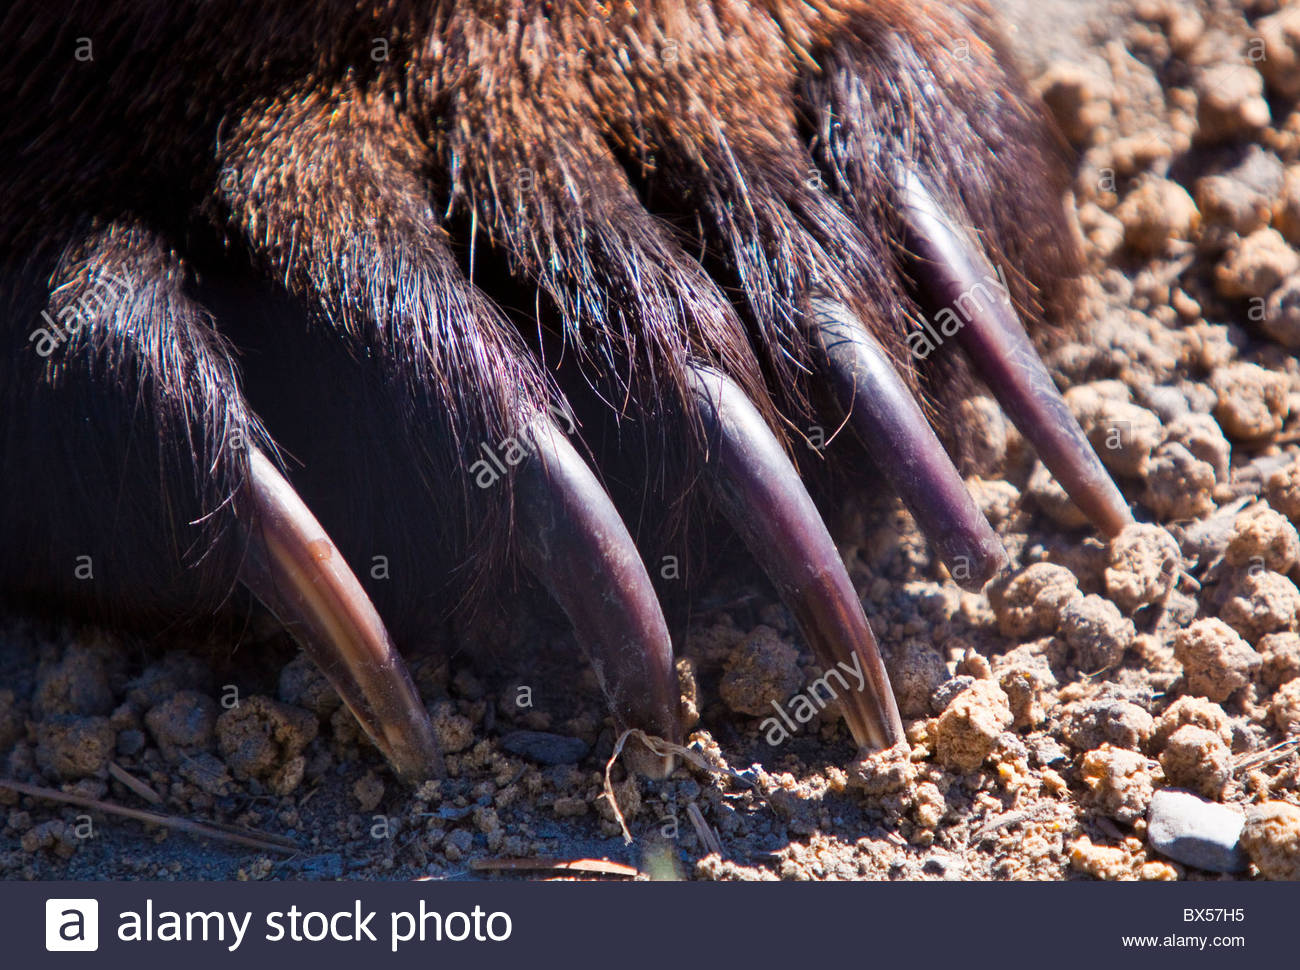 extreme-close-up-of-grizzly-bear-claw-BX57H5.jpg